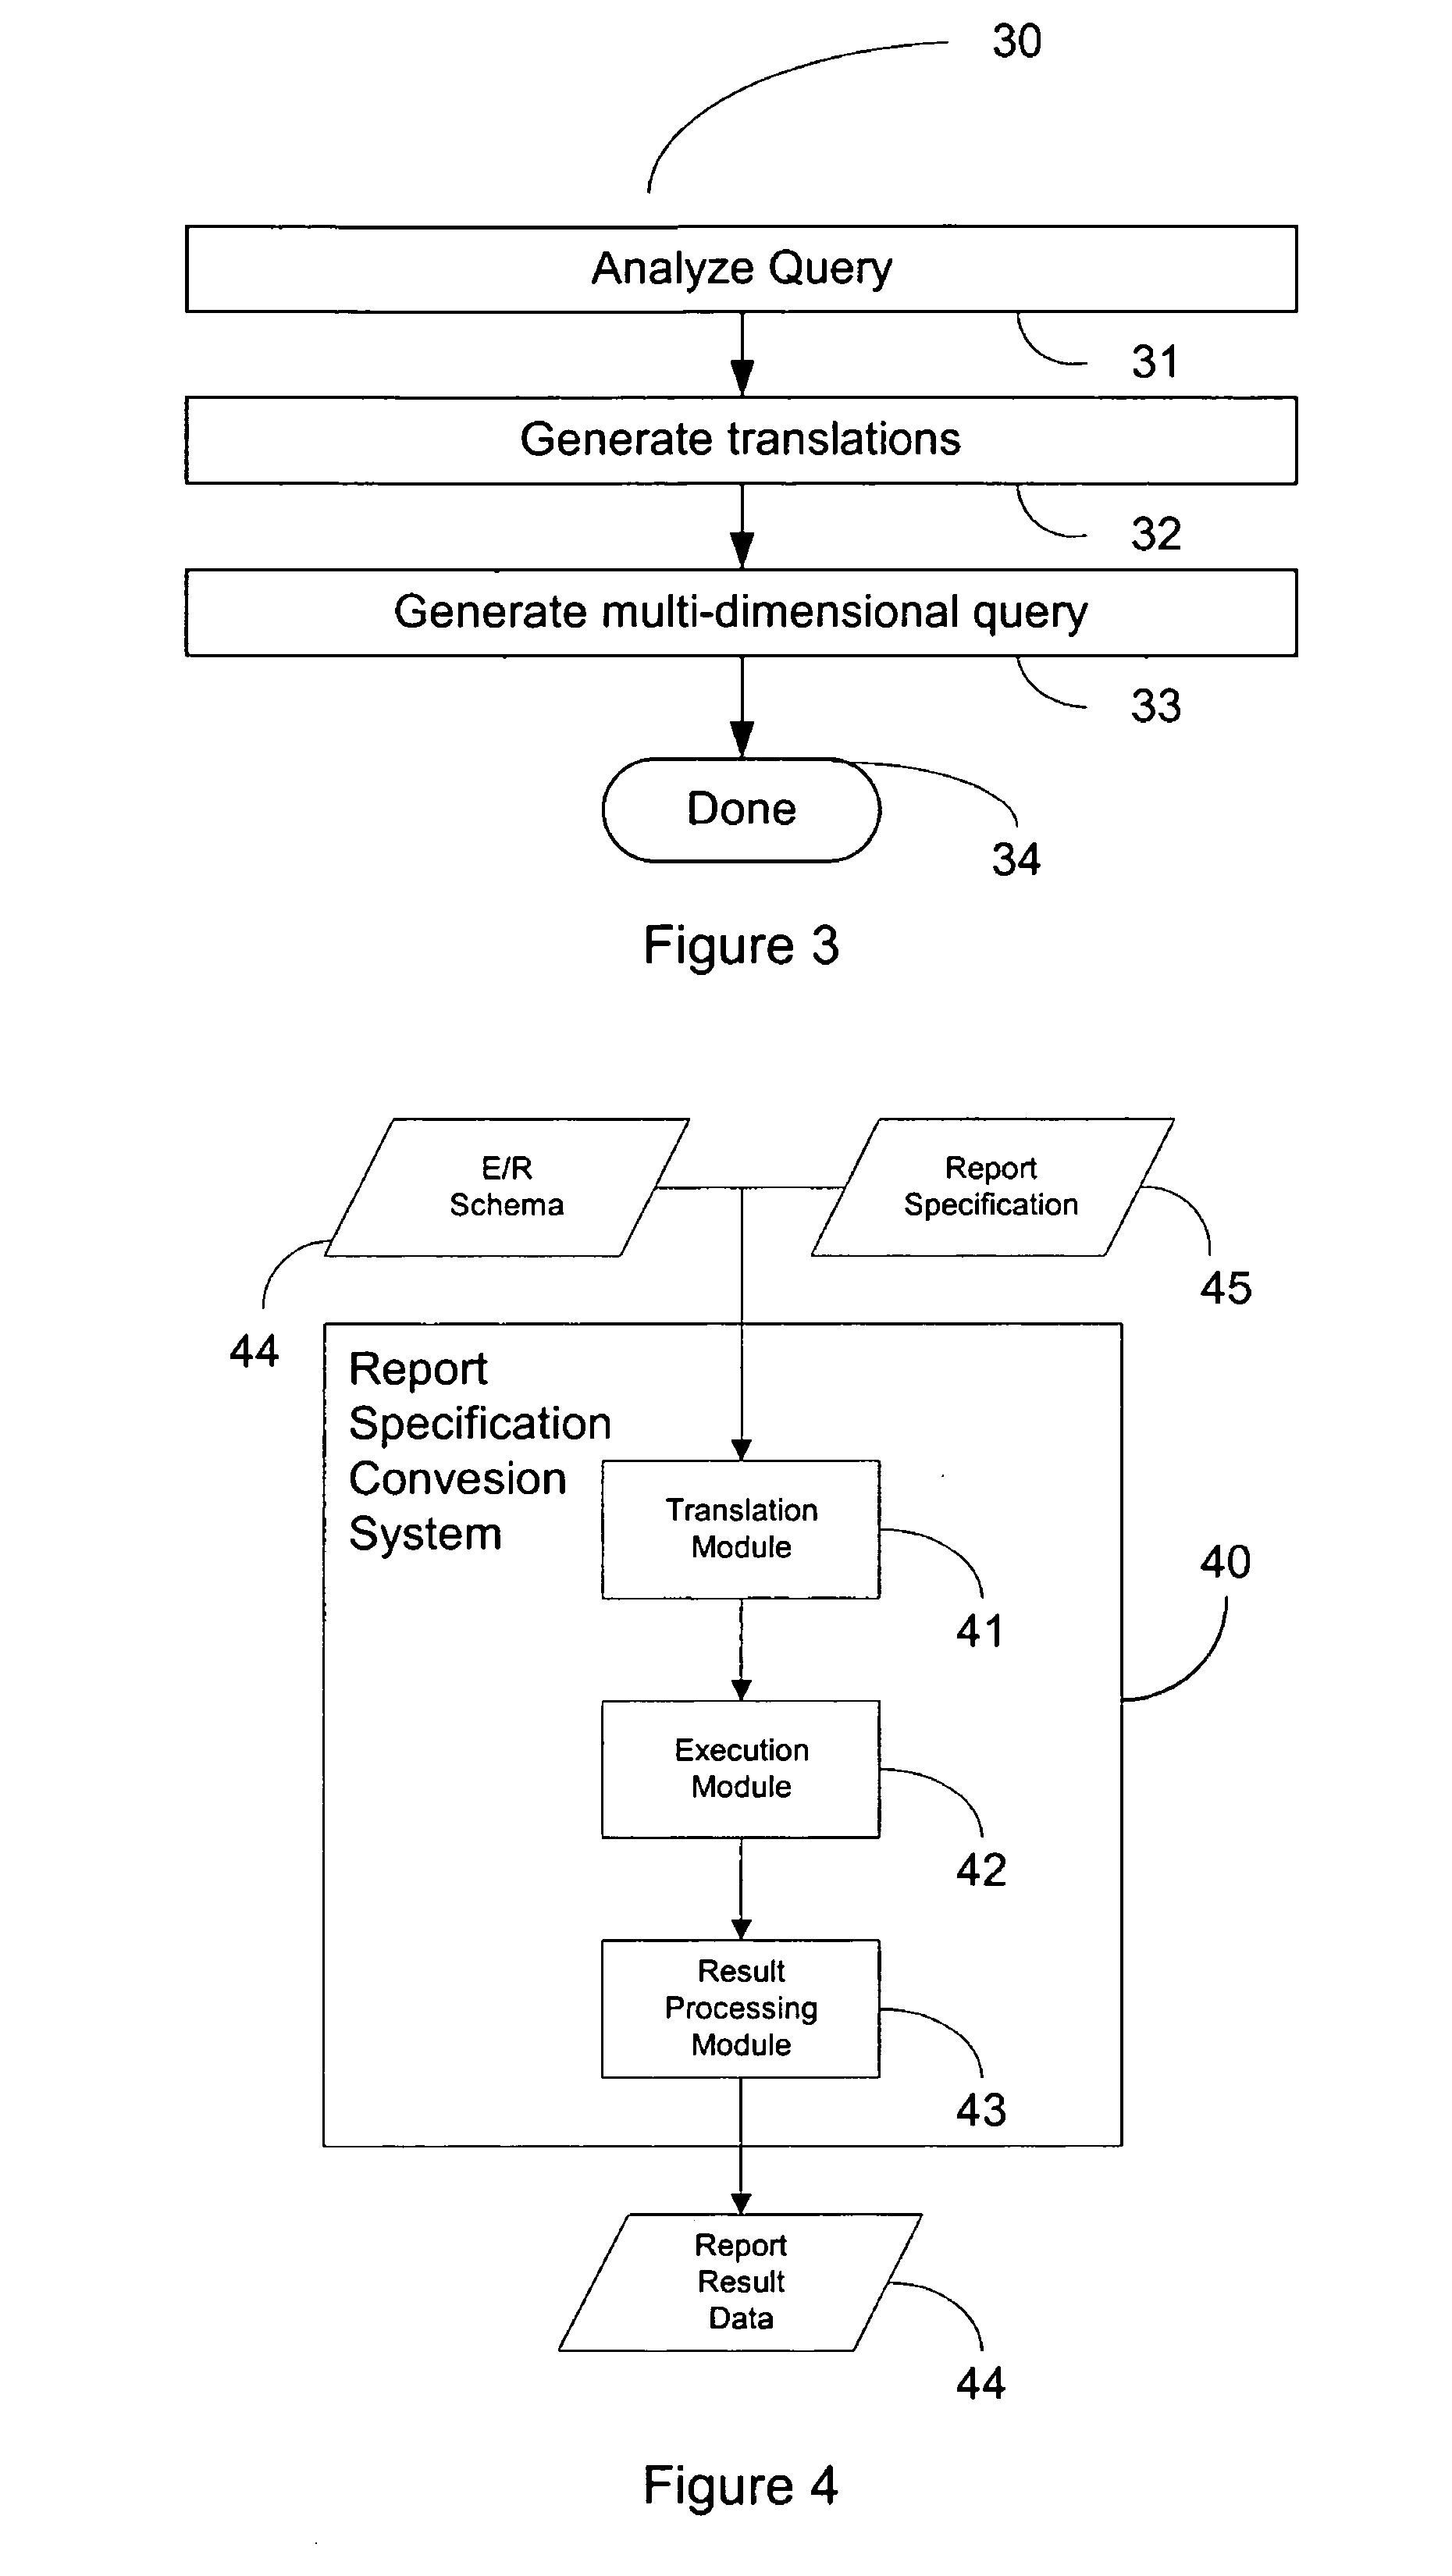 Method of transforming queries based upon E/R schema into multi-dimensional expression queries